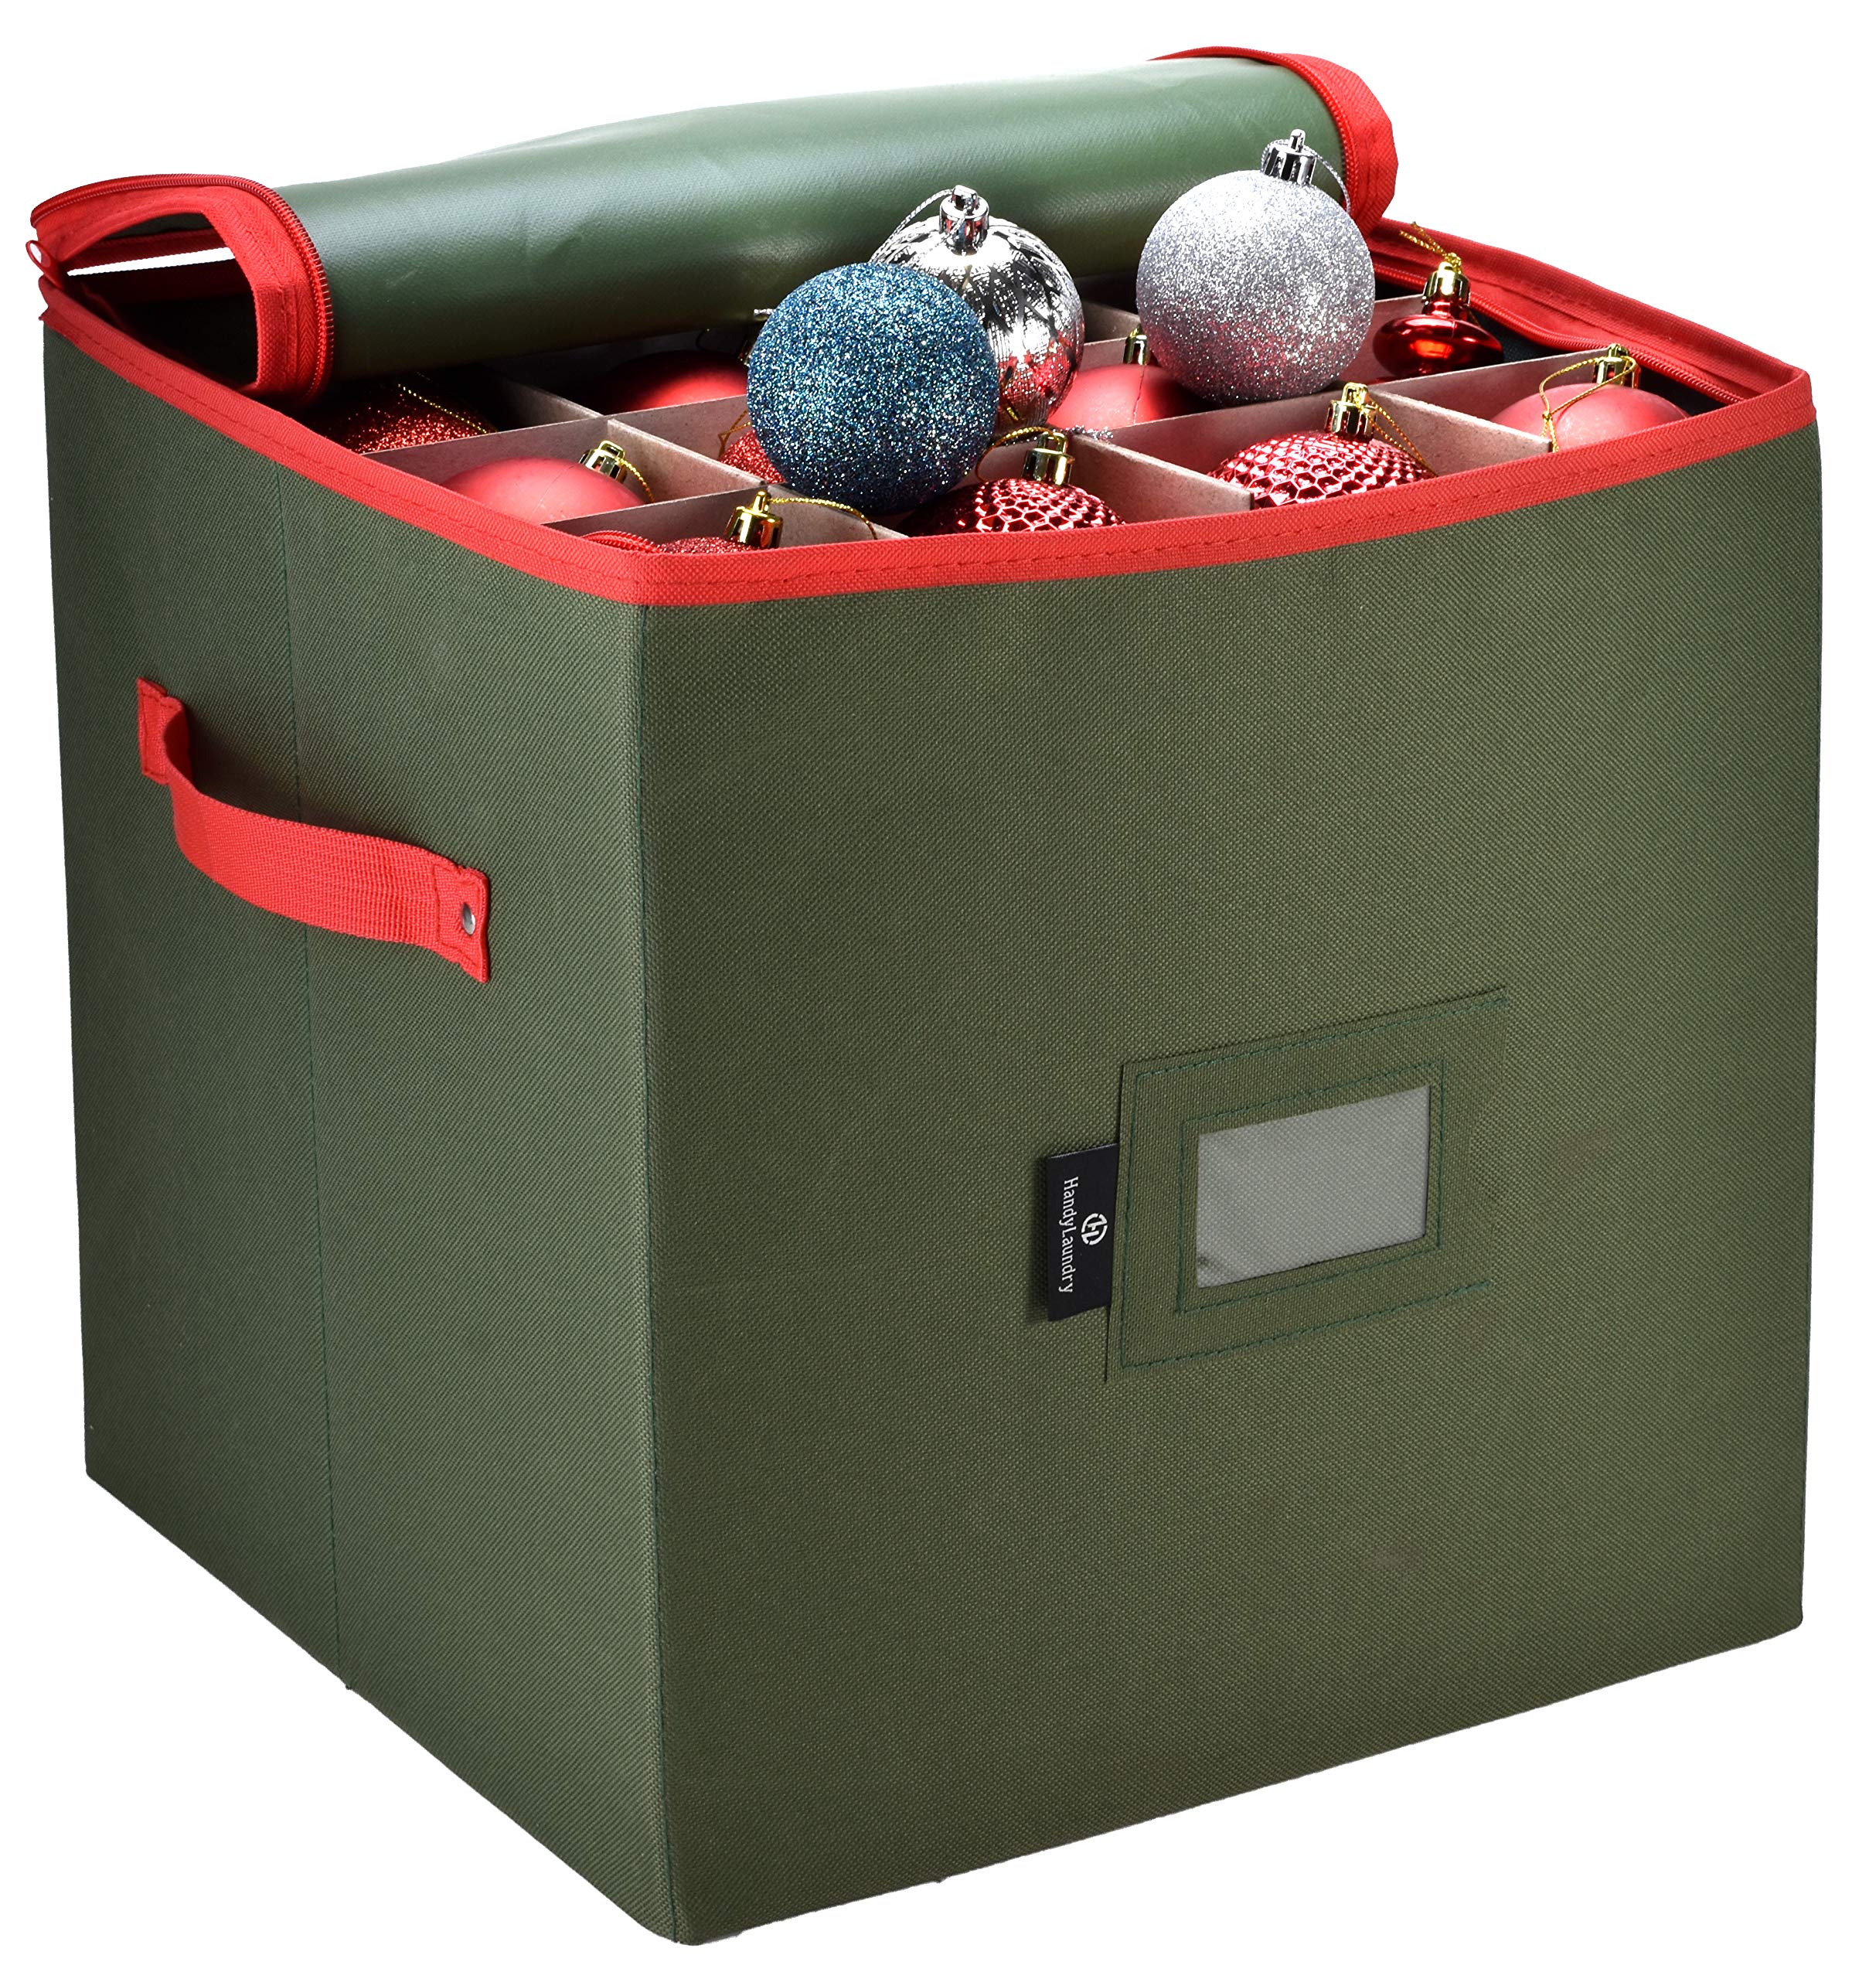 Christmas Ornament Storage - Stores up to 64 Holiday Ornaments, Adjustable Dividers, Covered Top, Two Handles. Attractive Storage Box Keeps Holiday Decorations Clean and Dry for Next Season.  - Like New